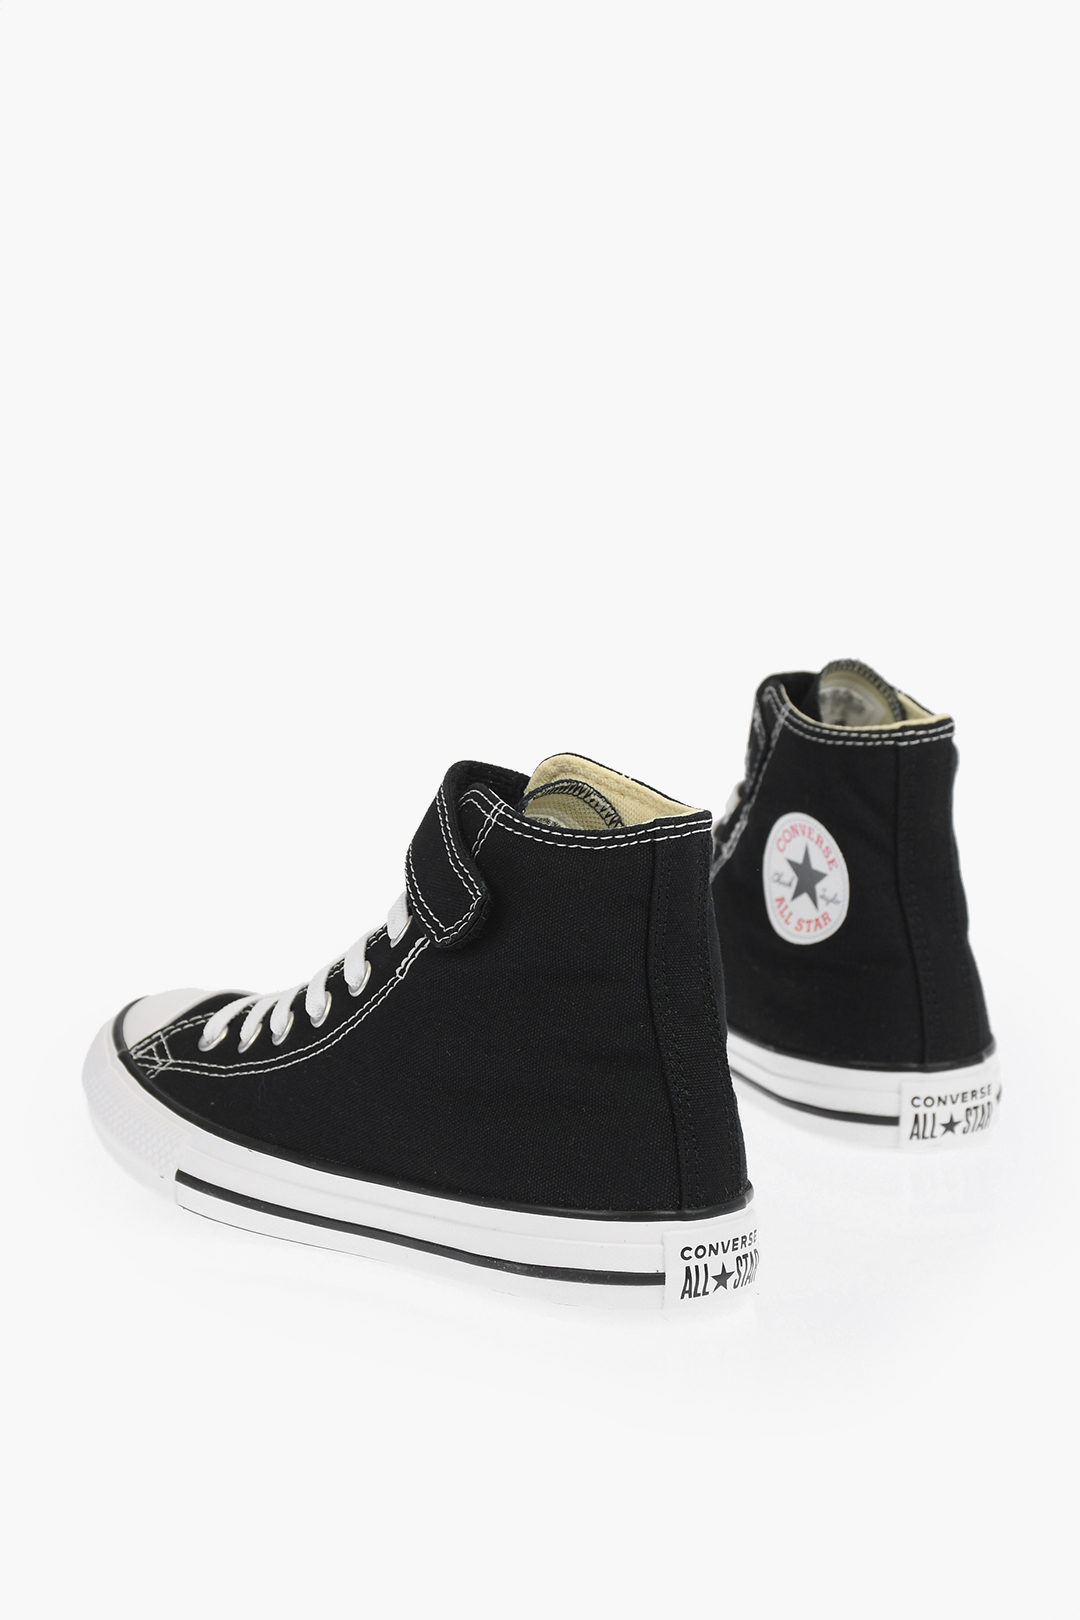 Converse KIDS CHUCK TAYLOR ALL STAR fabric 1V high top sneakers unisex  children boys girls - Glamood Outlet